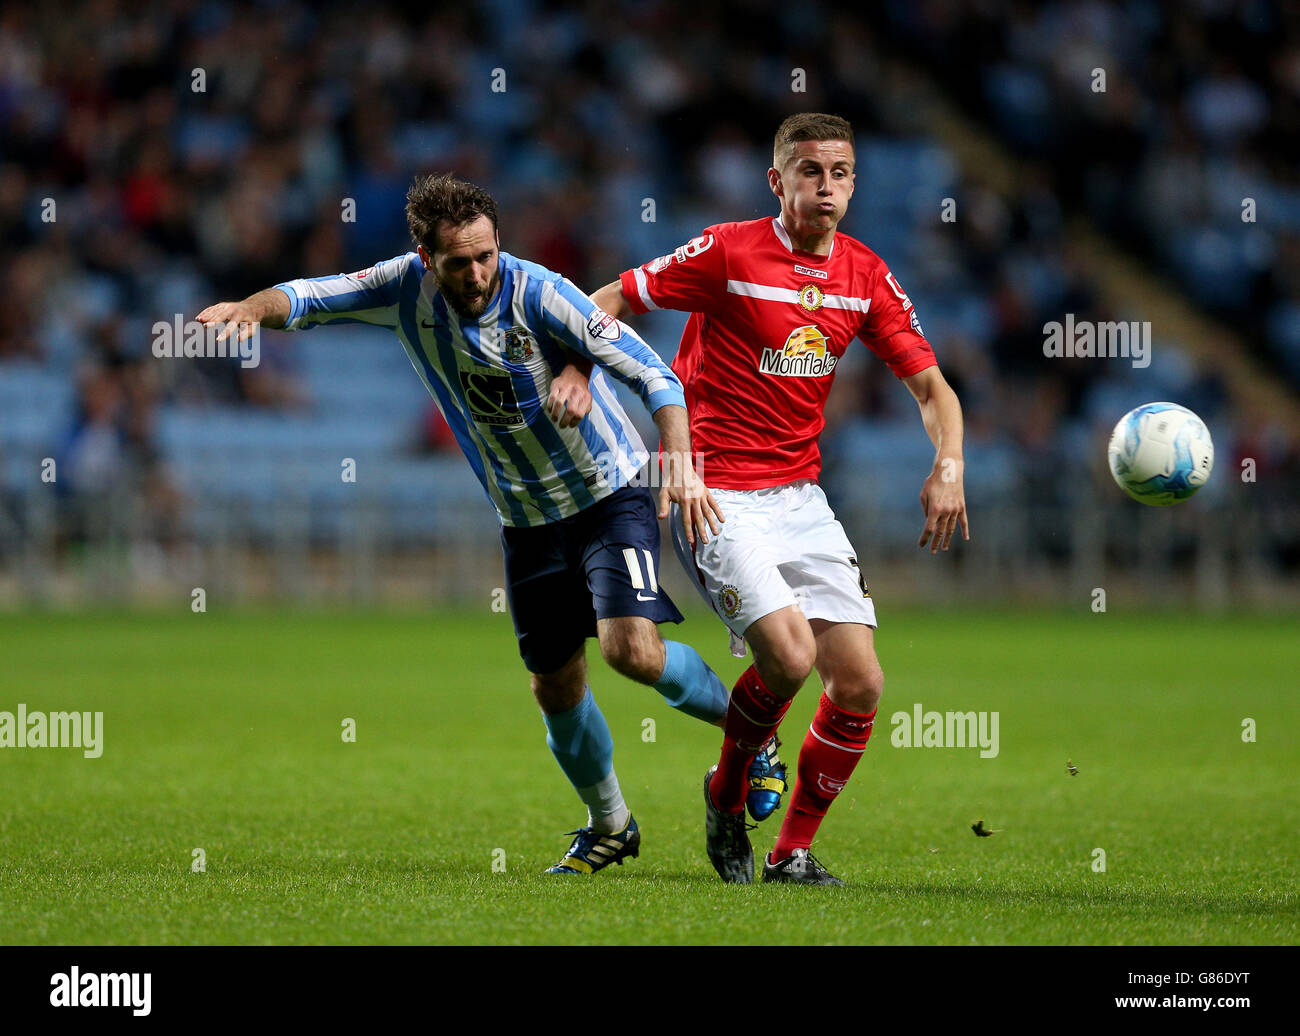 Coventry City's Jim O'Brien (left) and Crewe Alexandra's Ryan Colclough battle for the ball during the Sky Bet League One match at the Ricoh Arena, Coventry. Stock Photo